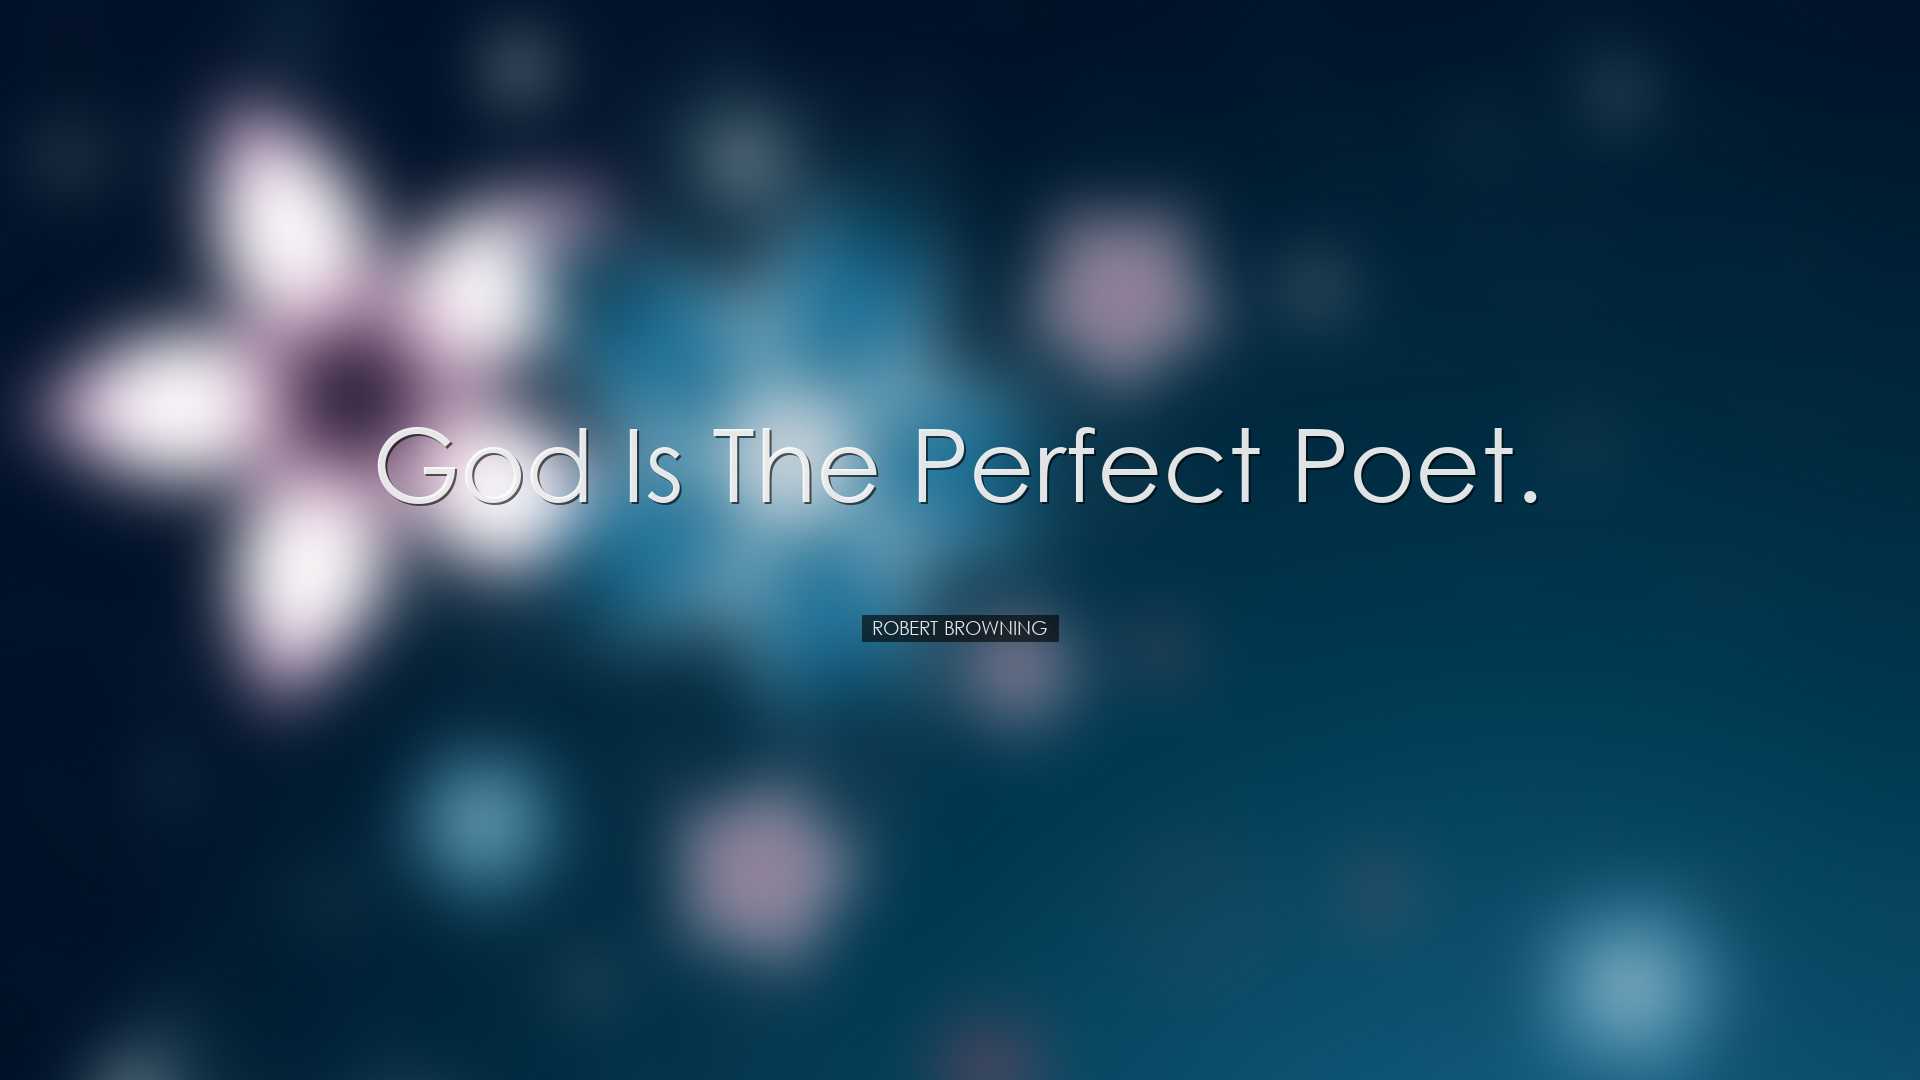 God is the perfect poet. - Robert Browning